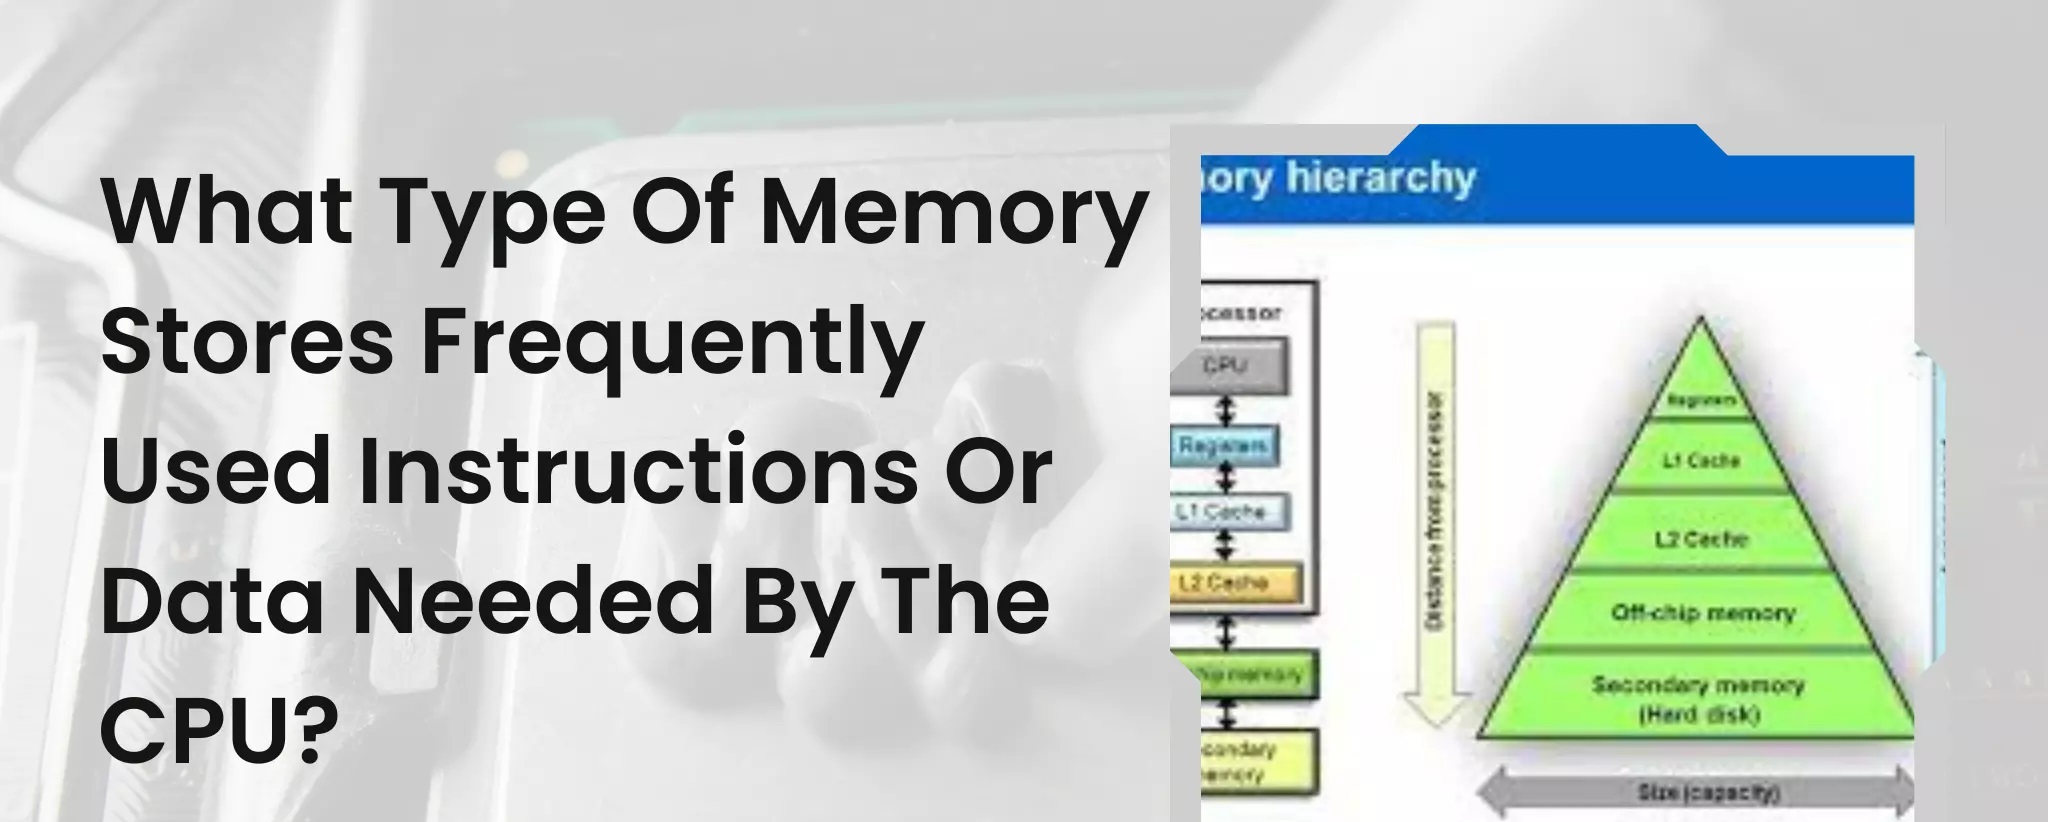 what-type-of-memory-stores-frequently-used-instructions-or-data-needed-by-the-cpu